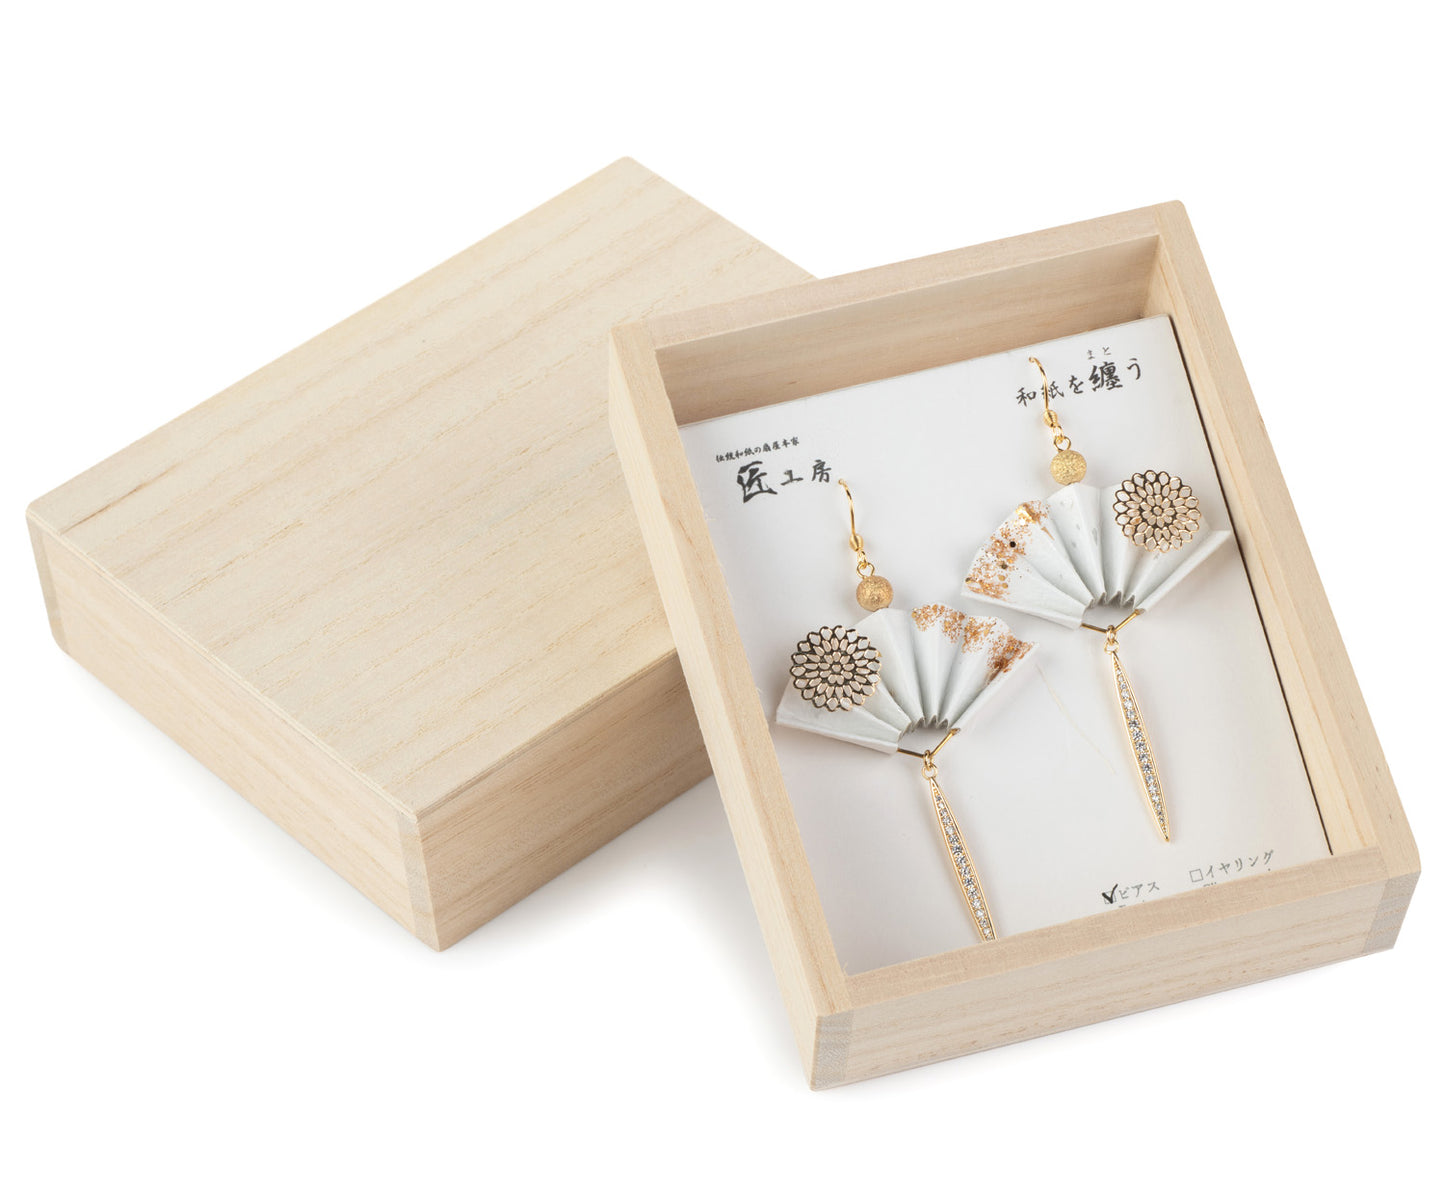 Iwai White and Gold Fan Premium Japanese Earrings in box